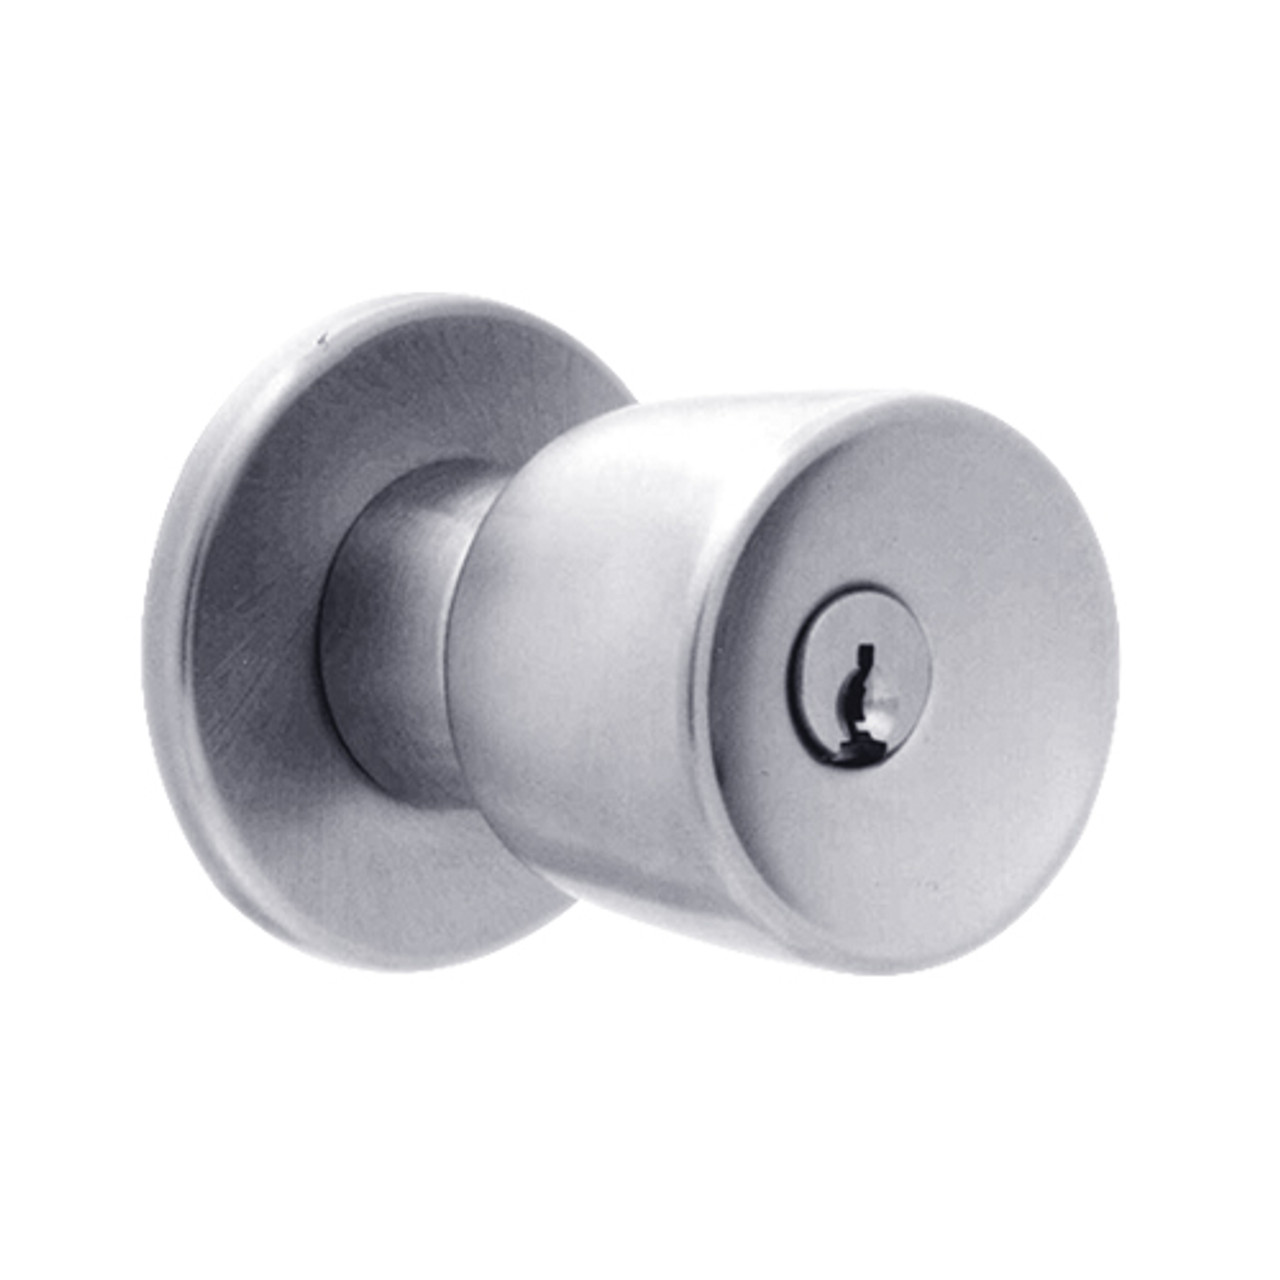 X571PD-EG-626 Falcon X Series Cylindrical Dormitory Lock with Elite-Gala Knob Style in Satin Chrome Finish